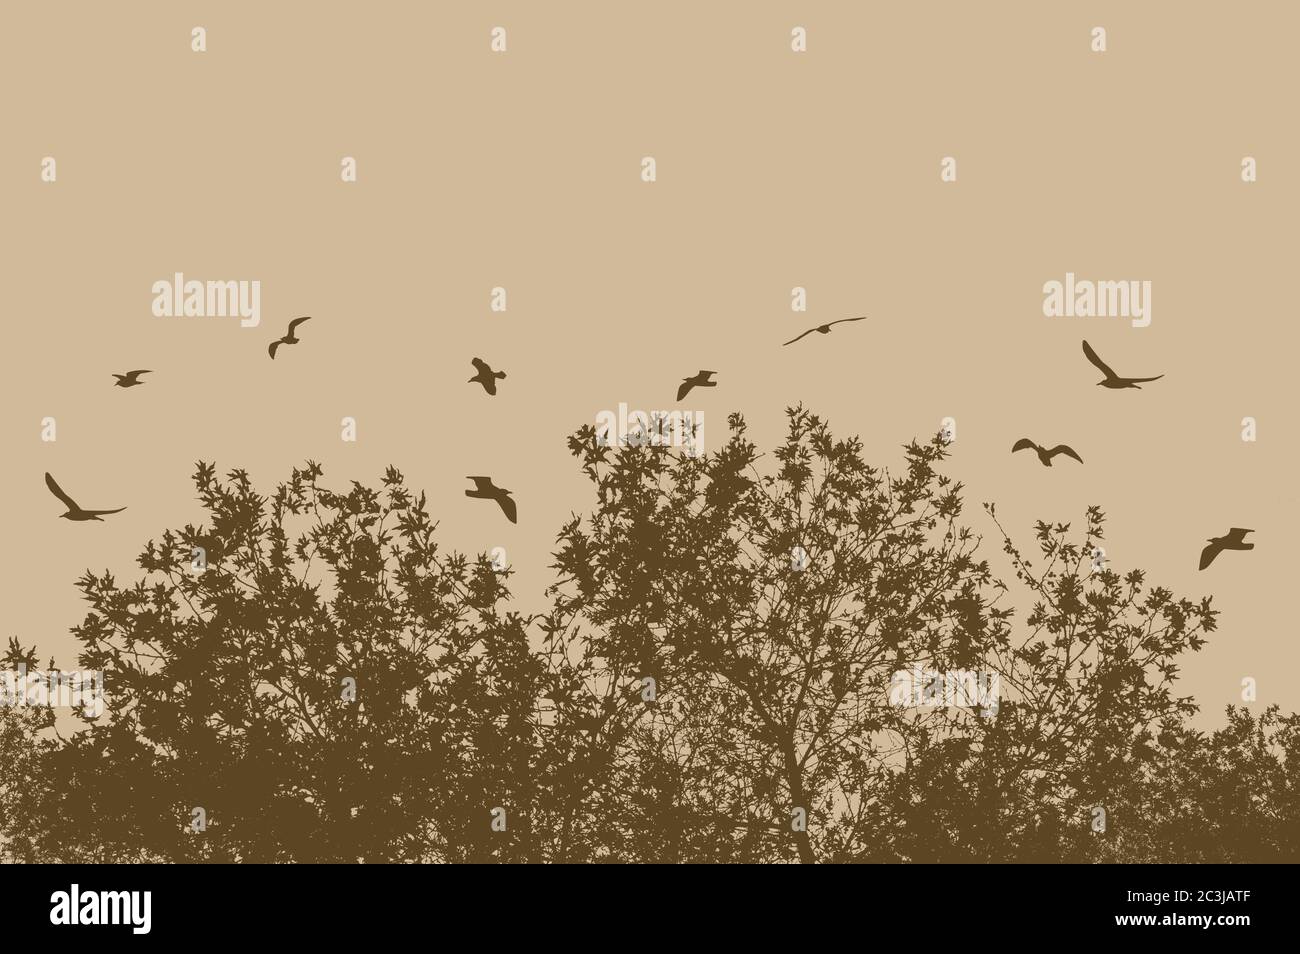 Silhouettes of tree and branches with flying birds on a beige background Stock Photo